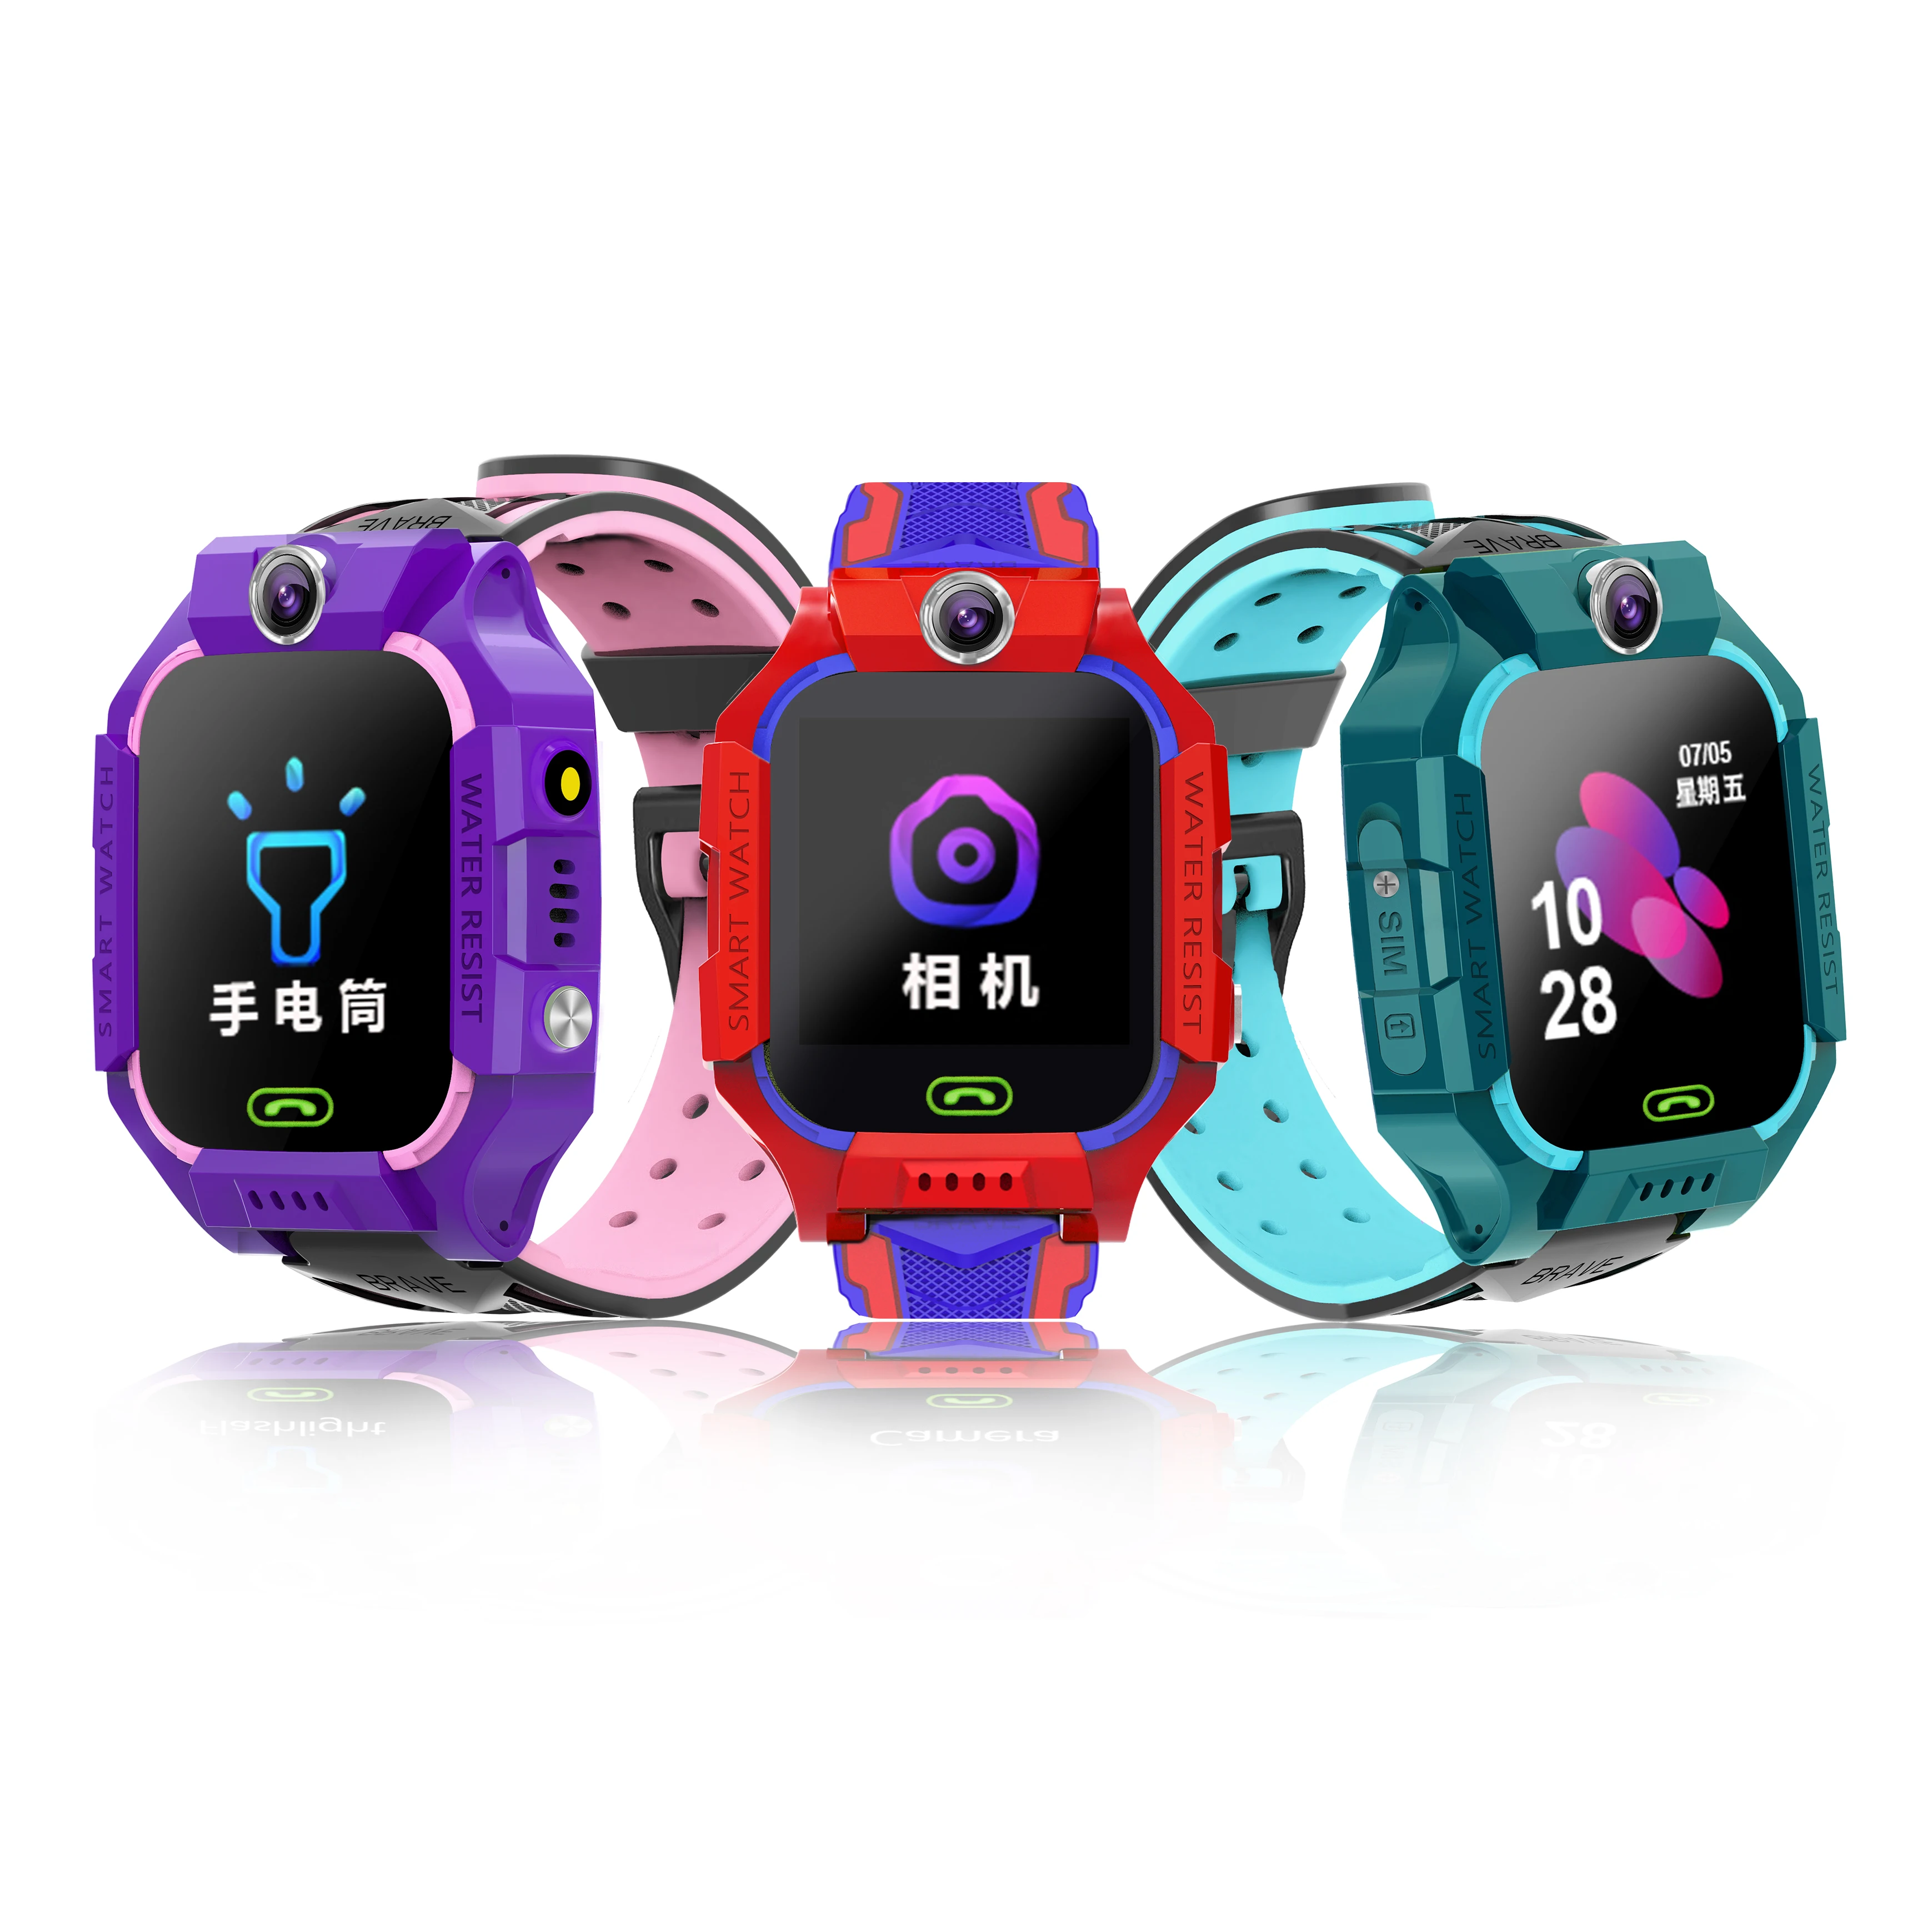 

Z6 Z5 Kids Smart Watch LBS positioning Electronic Fence One-click SOS Voice chat Camera SIM call Kids Smart Watch Q19